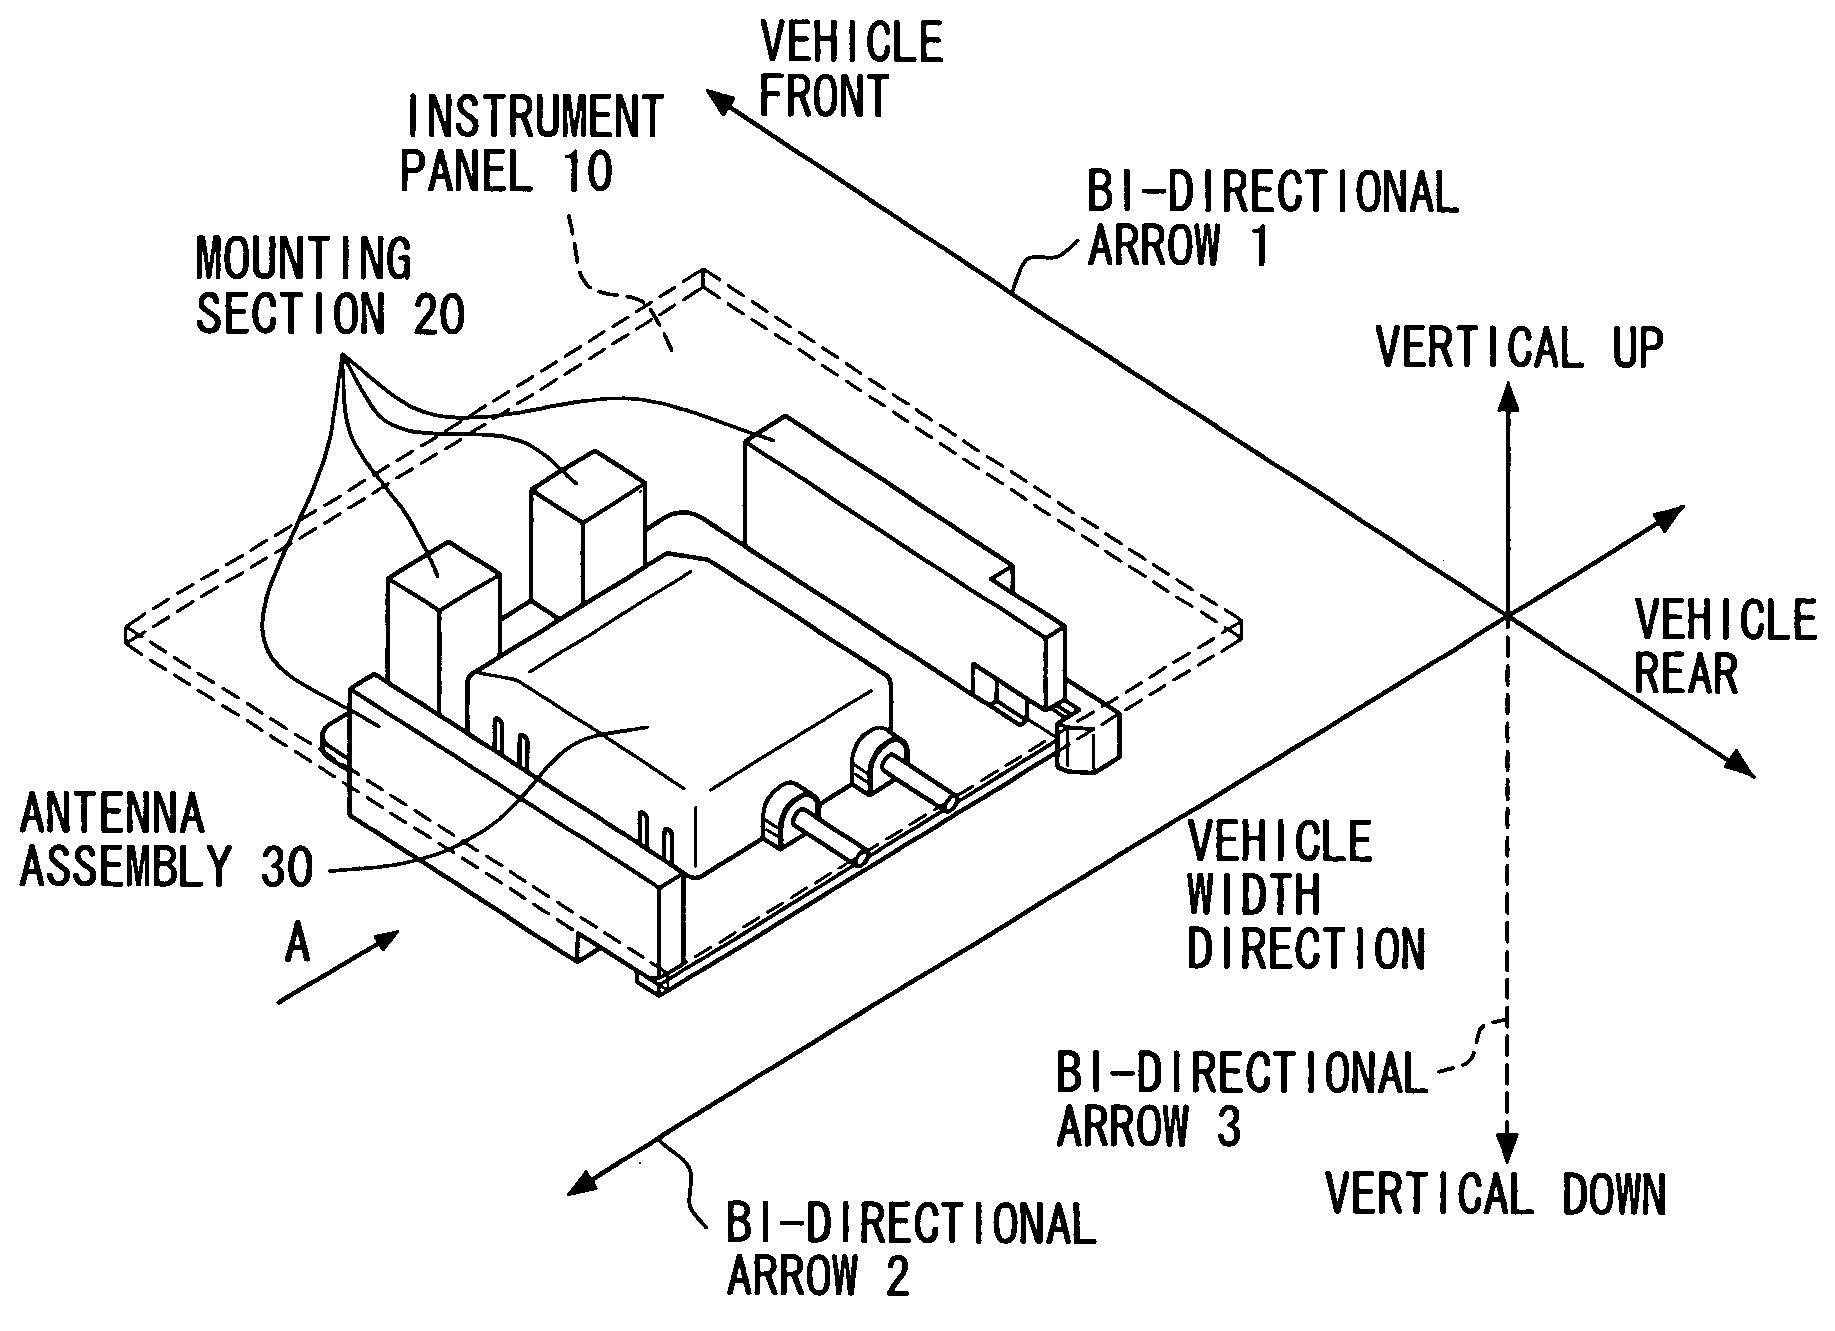 Antenna mounting assembly